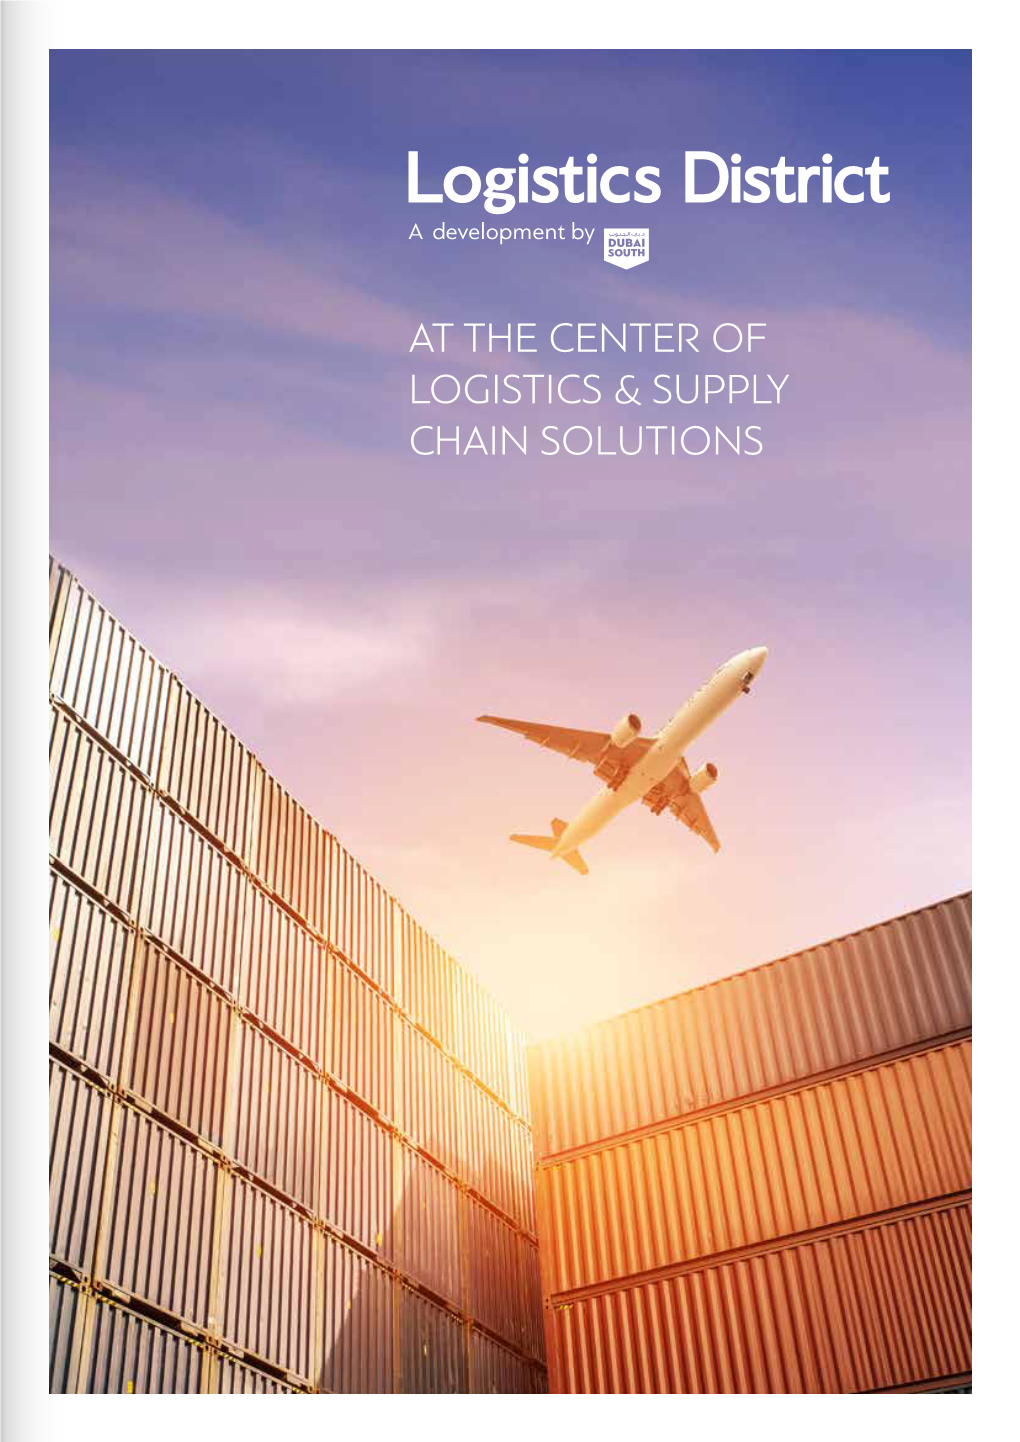 At the Center of Logistics & Supply Chain